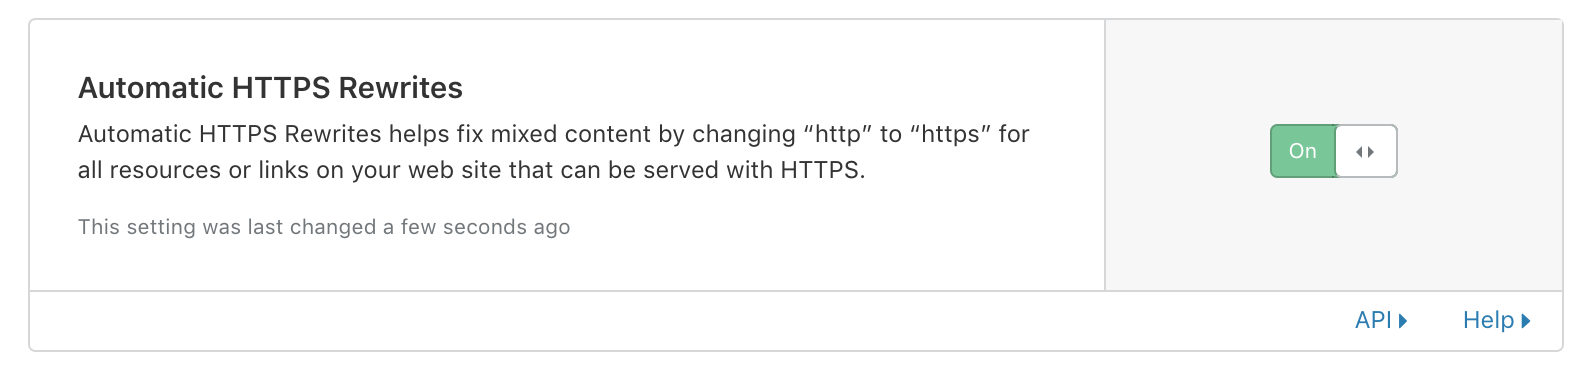 Cloudflare Protection - HTTPS Rewrites